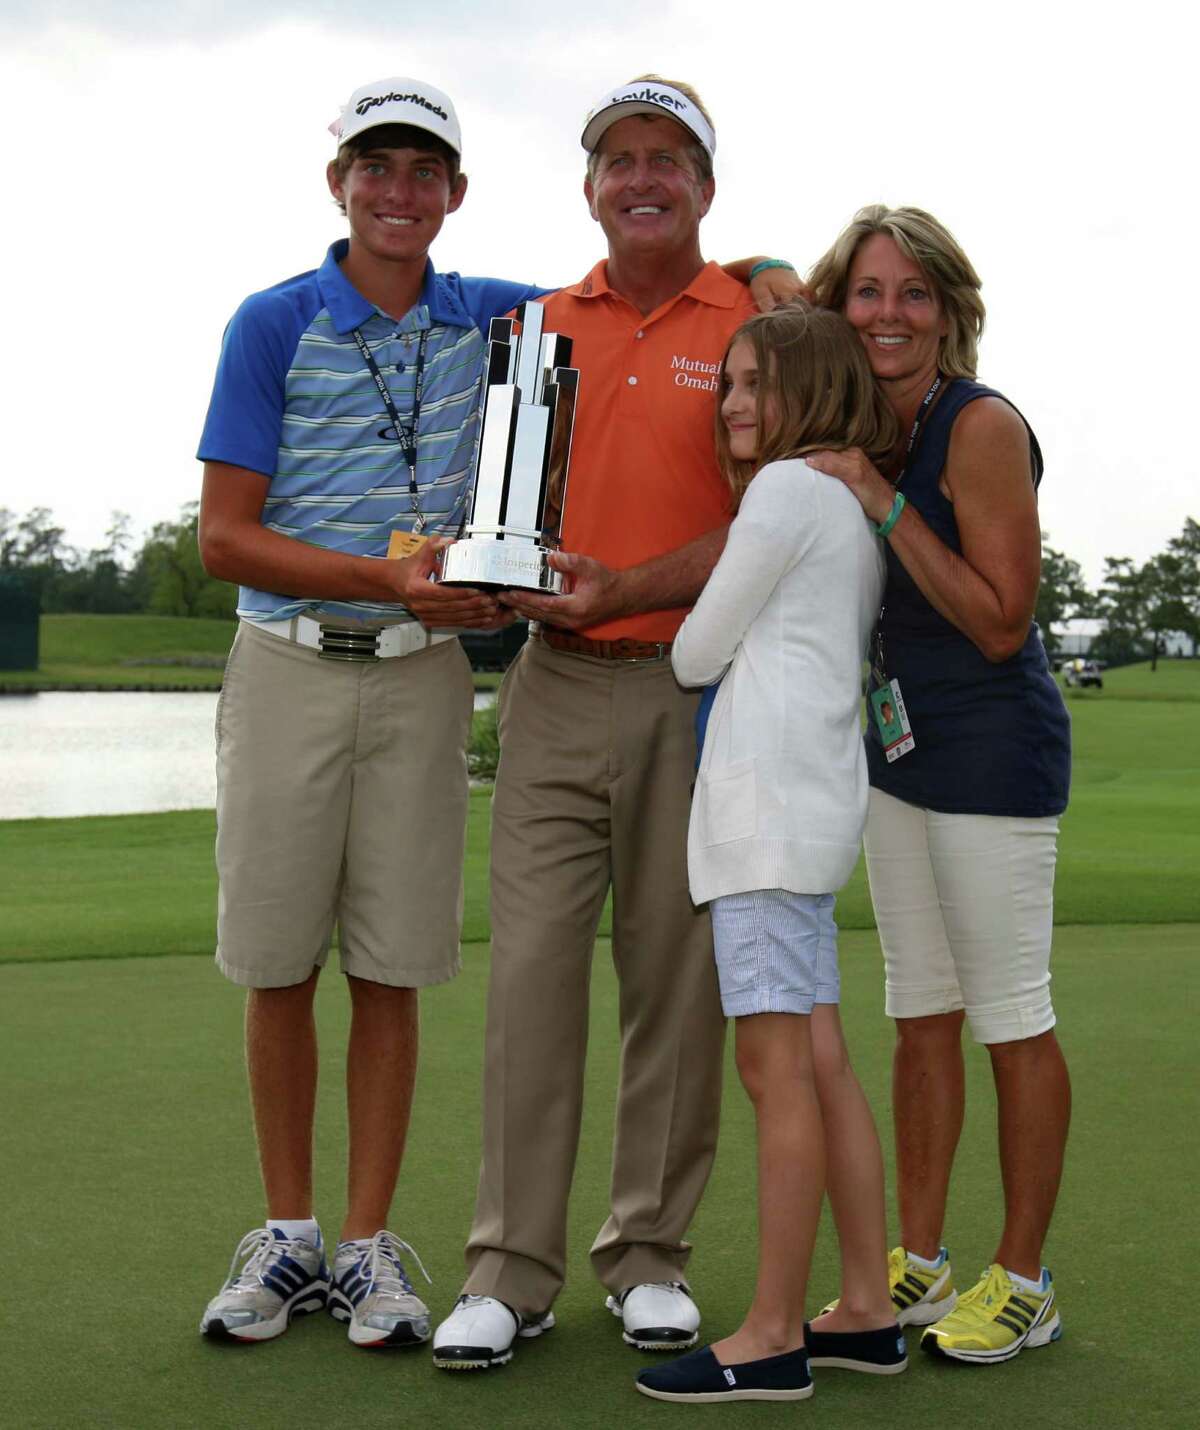 Final round, May 6 - Fred Funk (second from left) and family, Taylor (left), Perry, and wife Sharon pose with Funk's winner's trophy after Funk won the Insperity Championship, Sunday, May 6, 2012 at the Tournament Course in The Woodlands, TX.